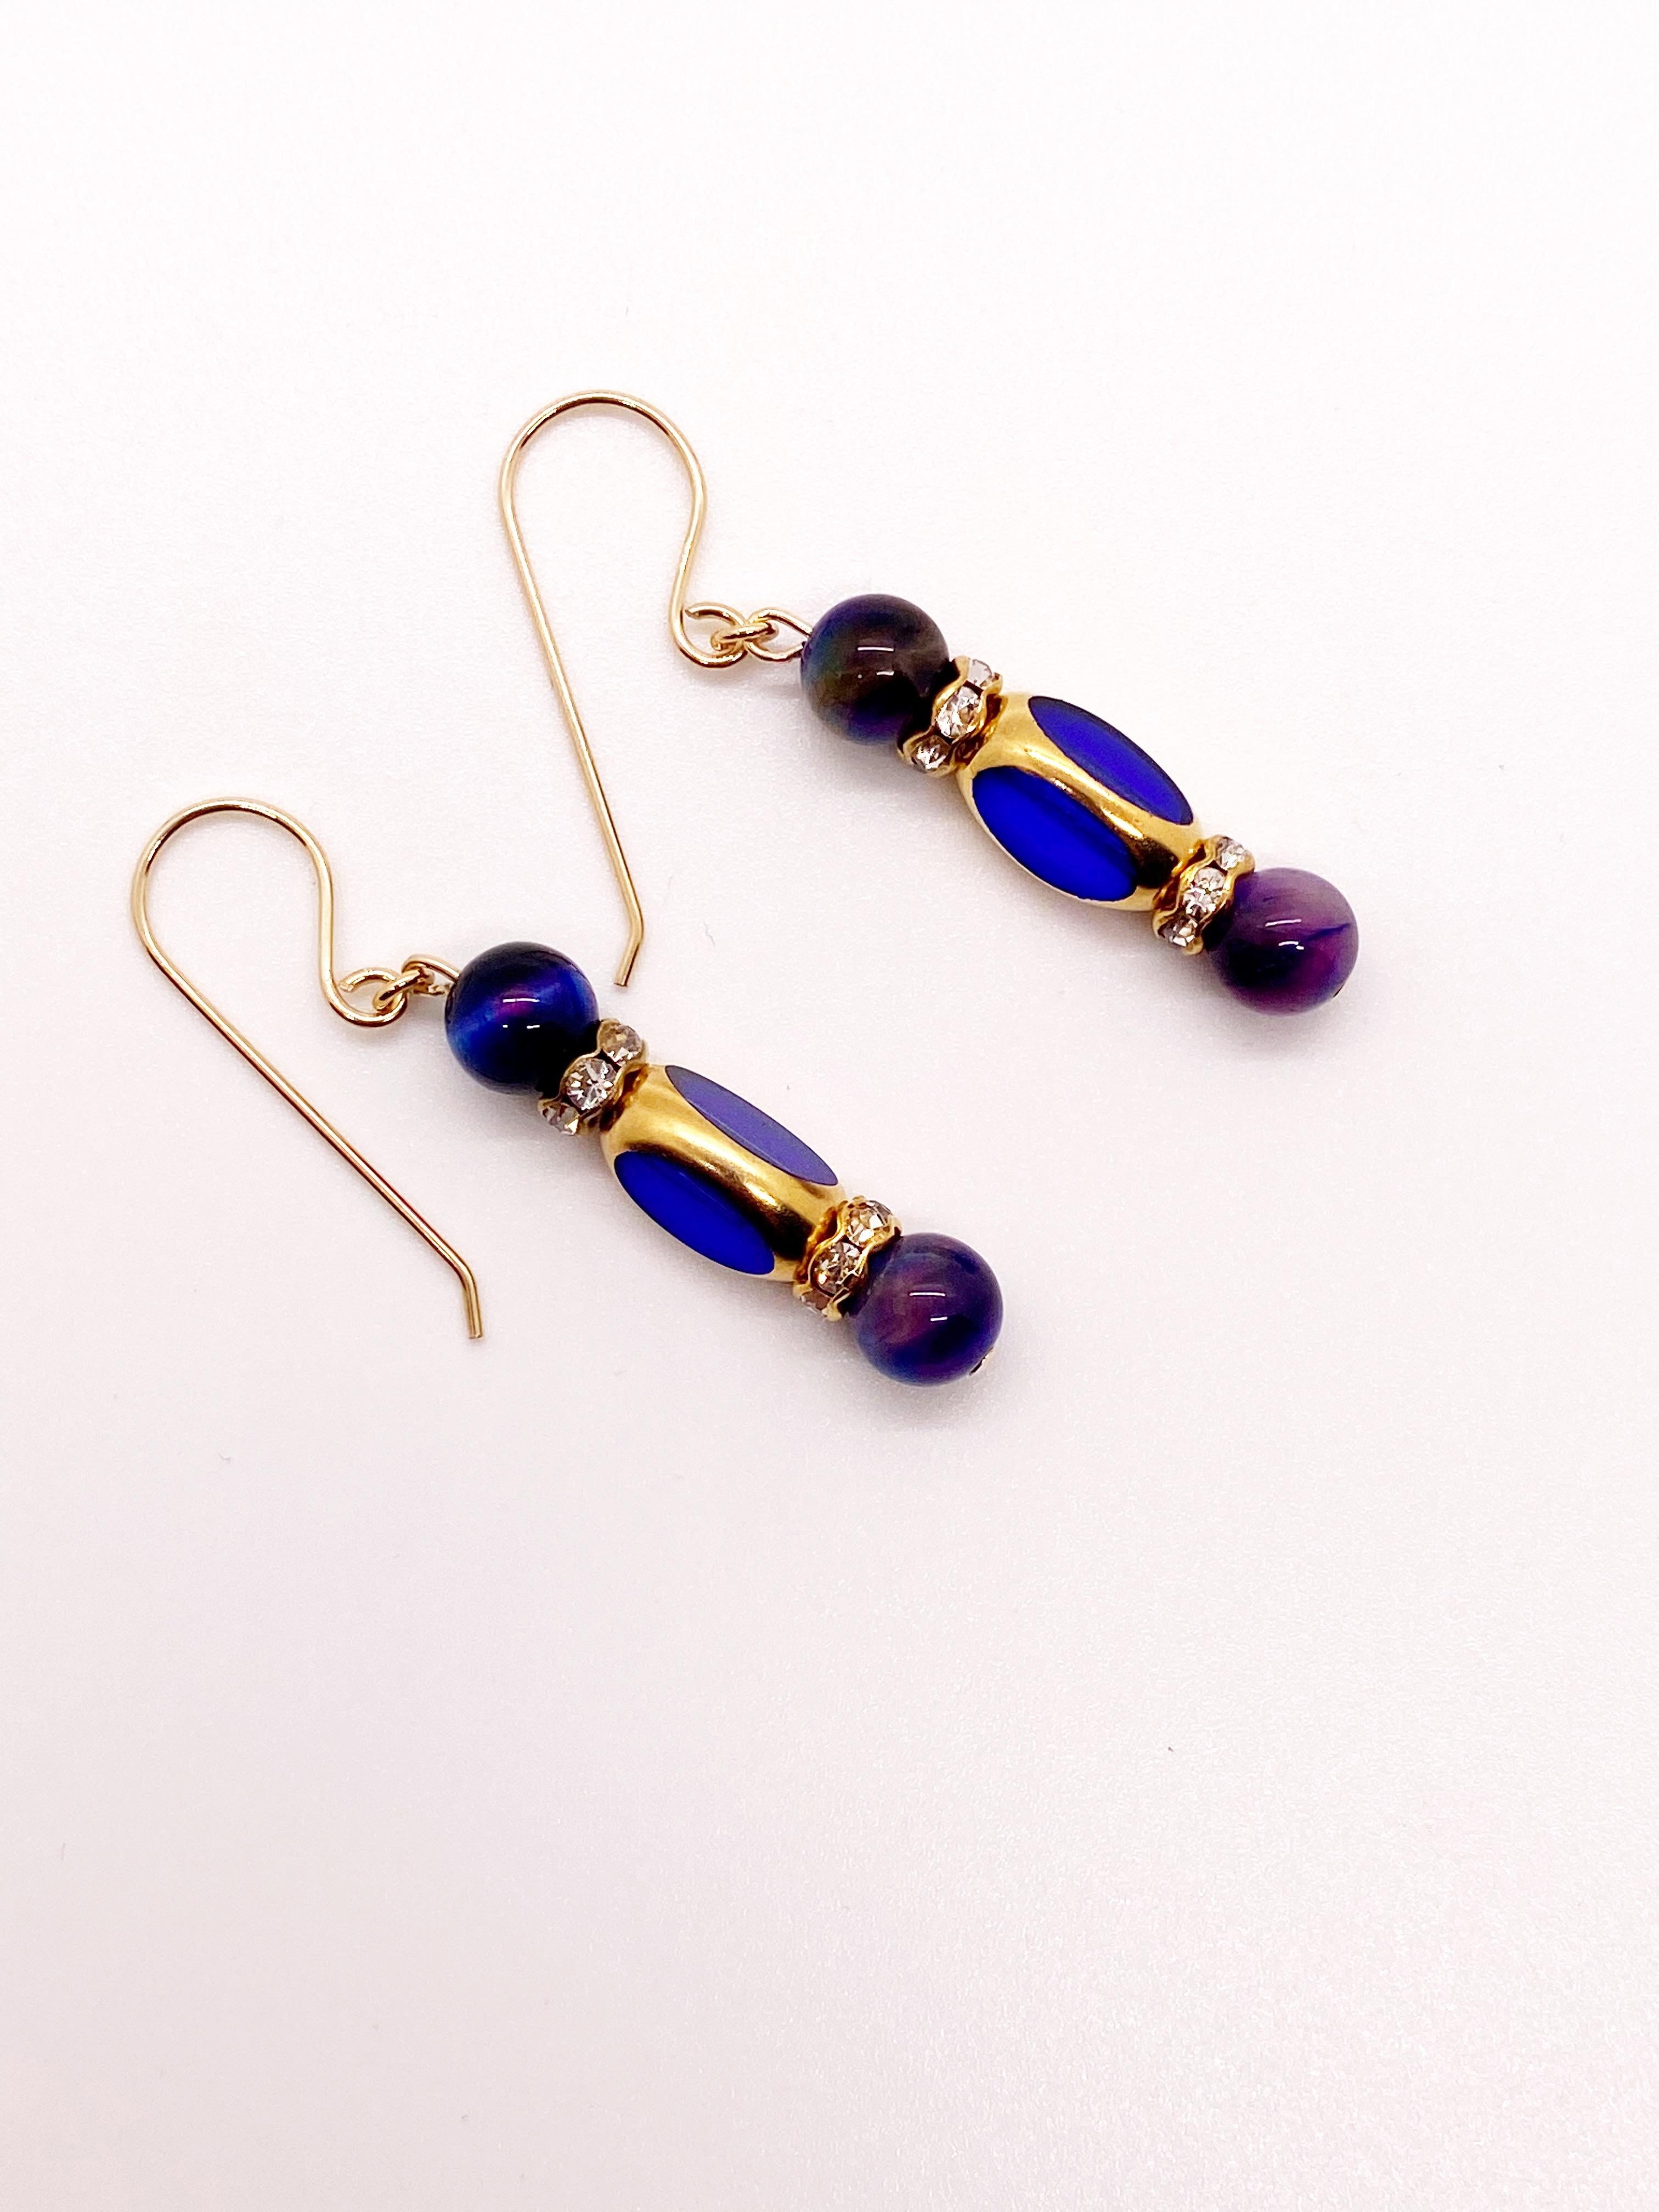 Contemporary Vintage German Glass Window Beads with 24K gold Blue Tiger's Eye Earrings